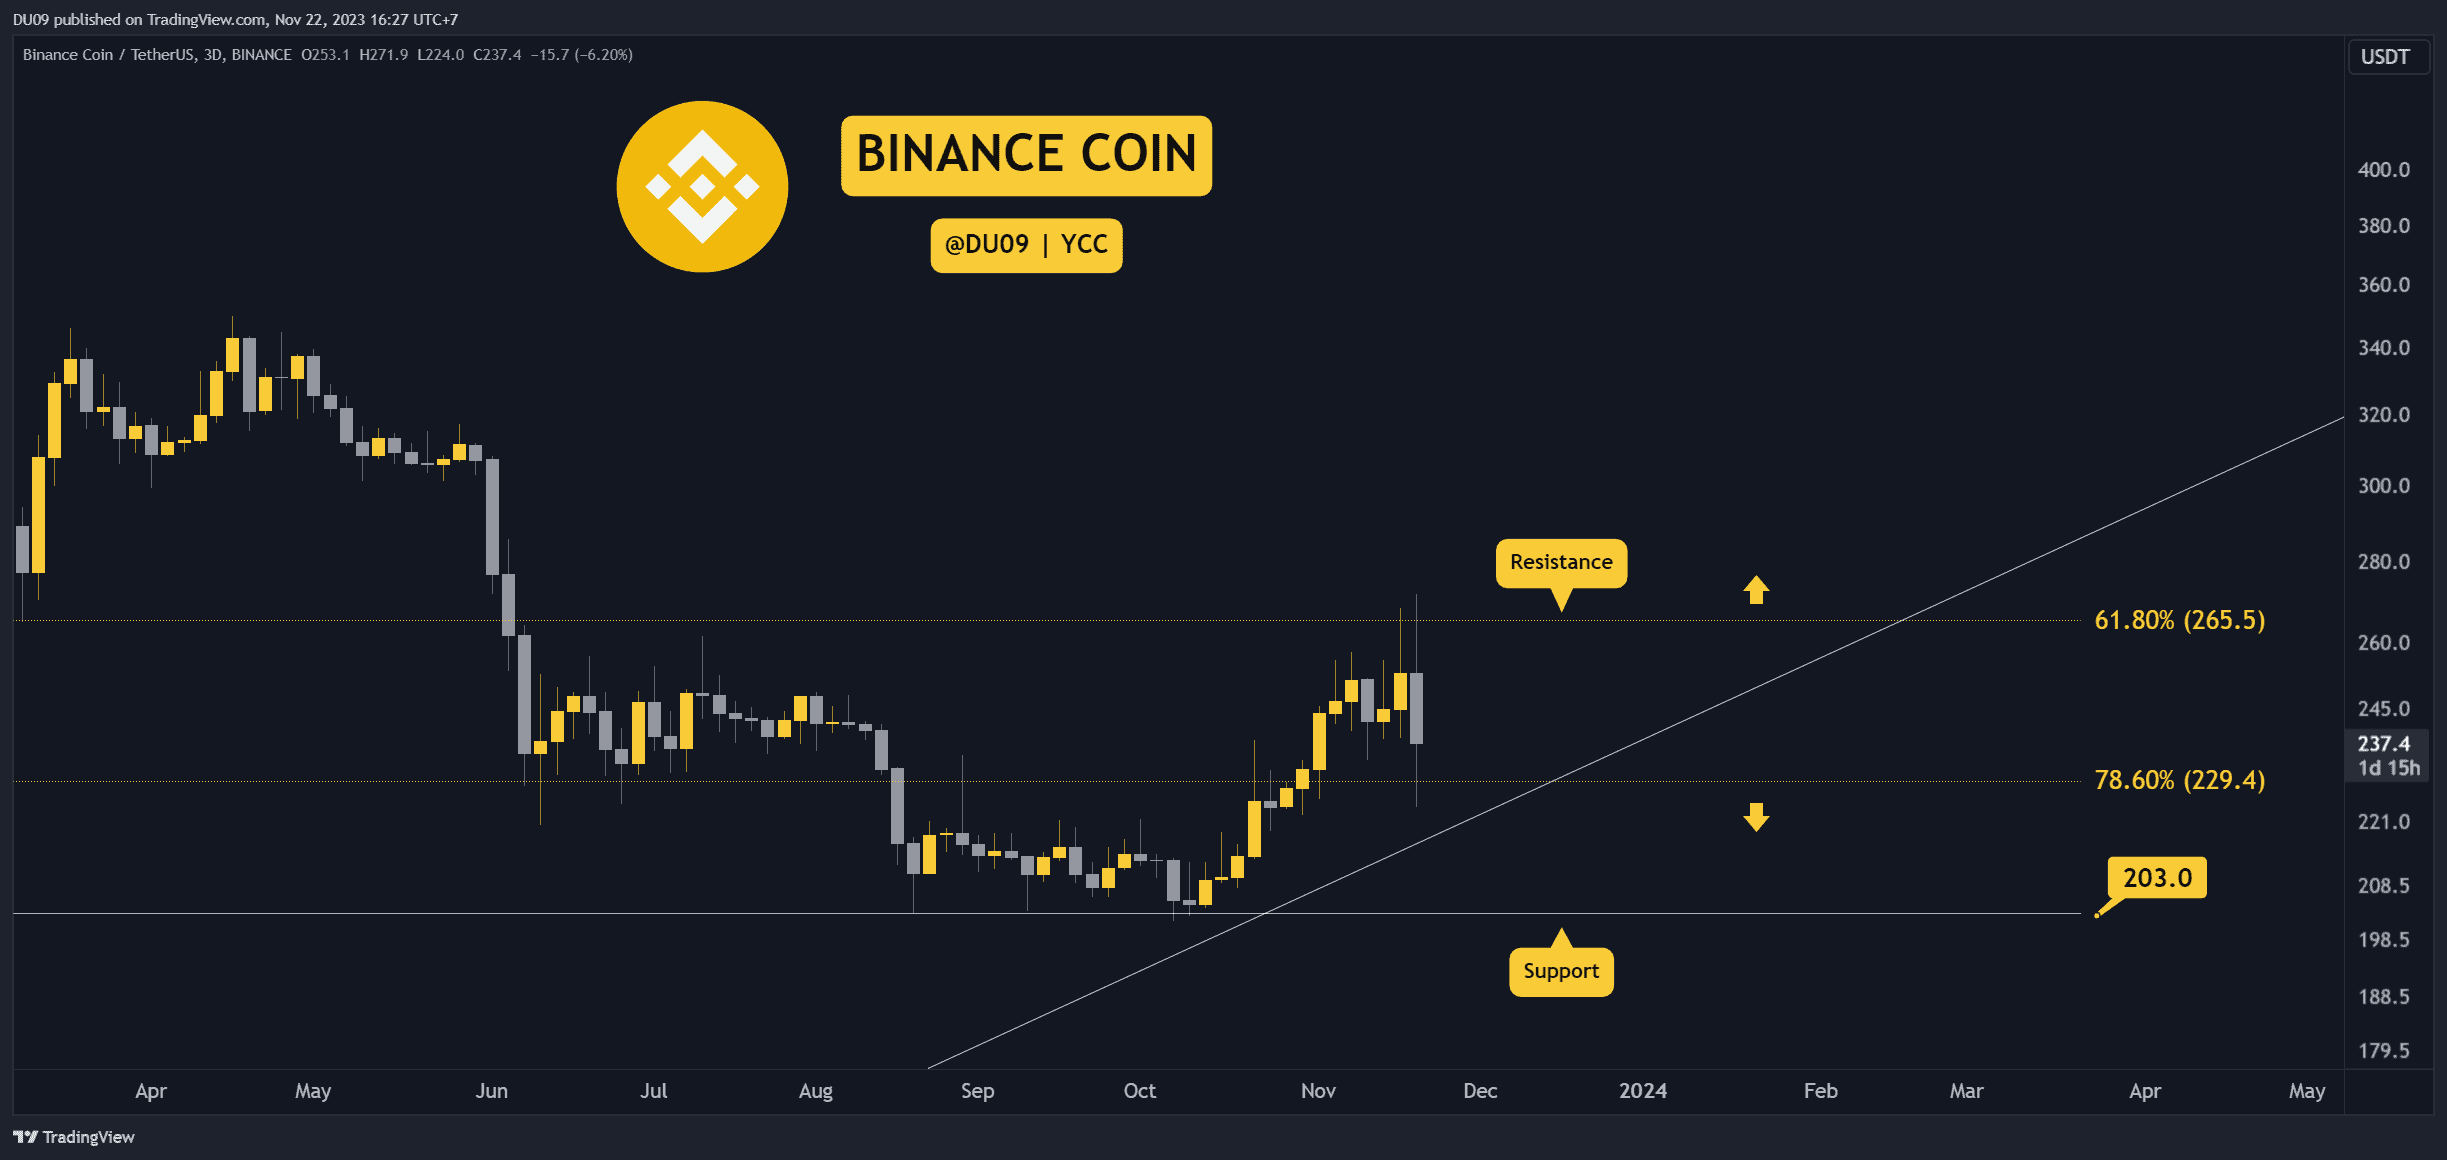 Bnb-crashes-following-doj-settlement,-how-low-can-it-go?-3-things-to-watch-this-week-(binance-coin-price-analysis)